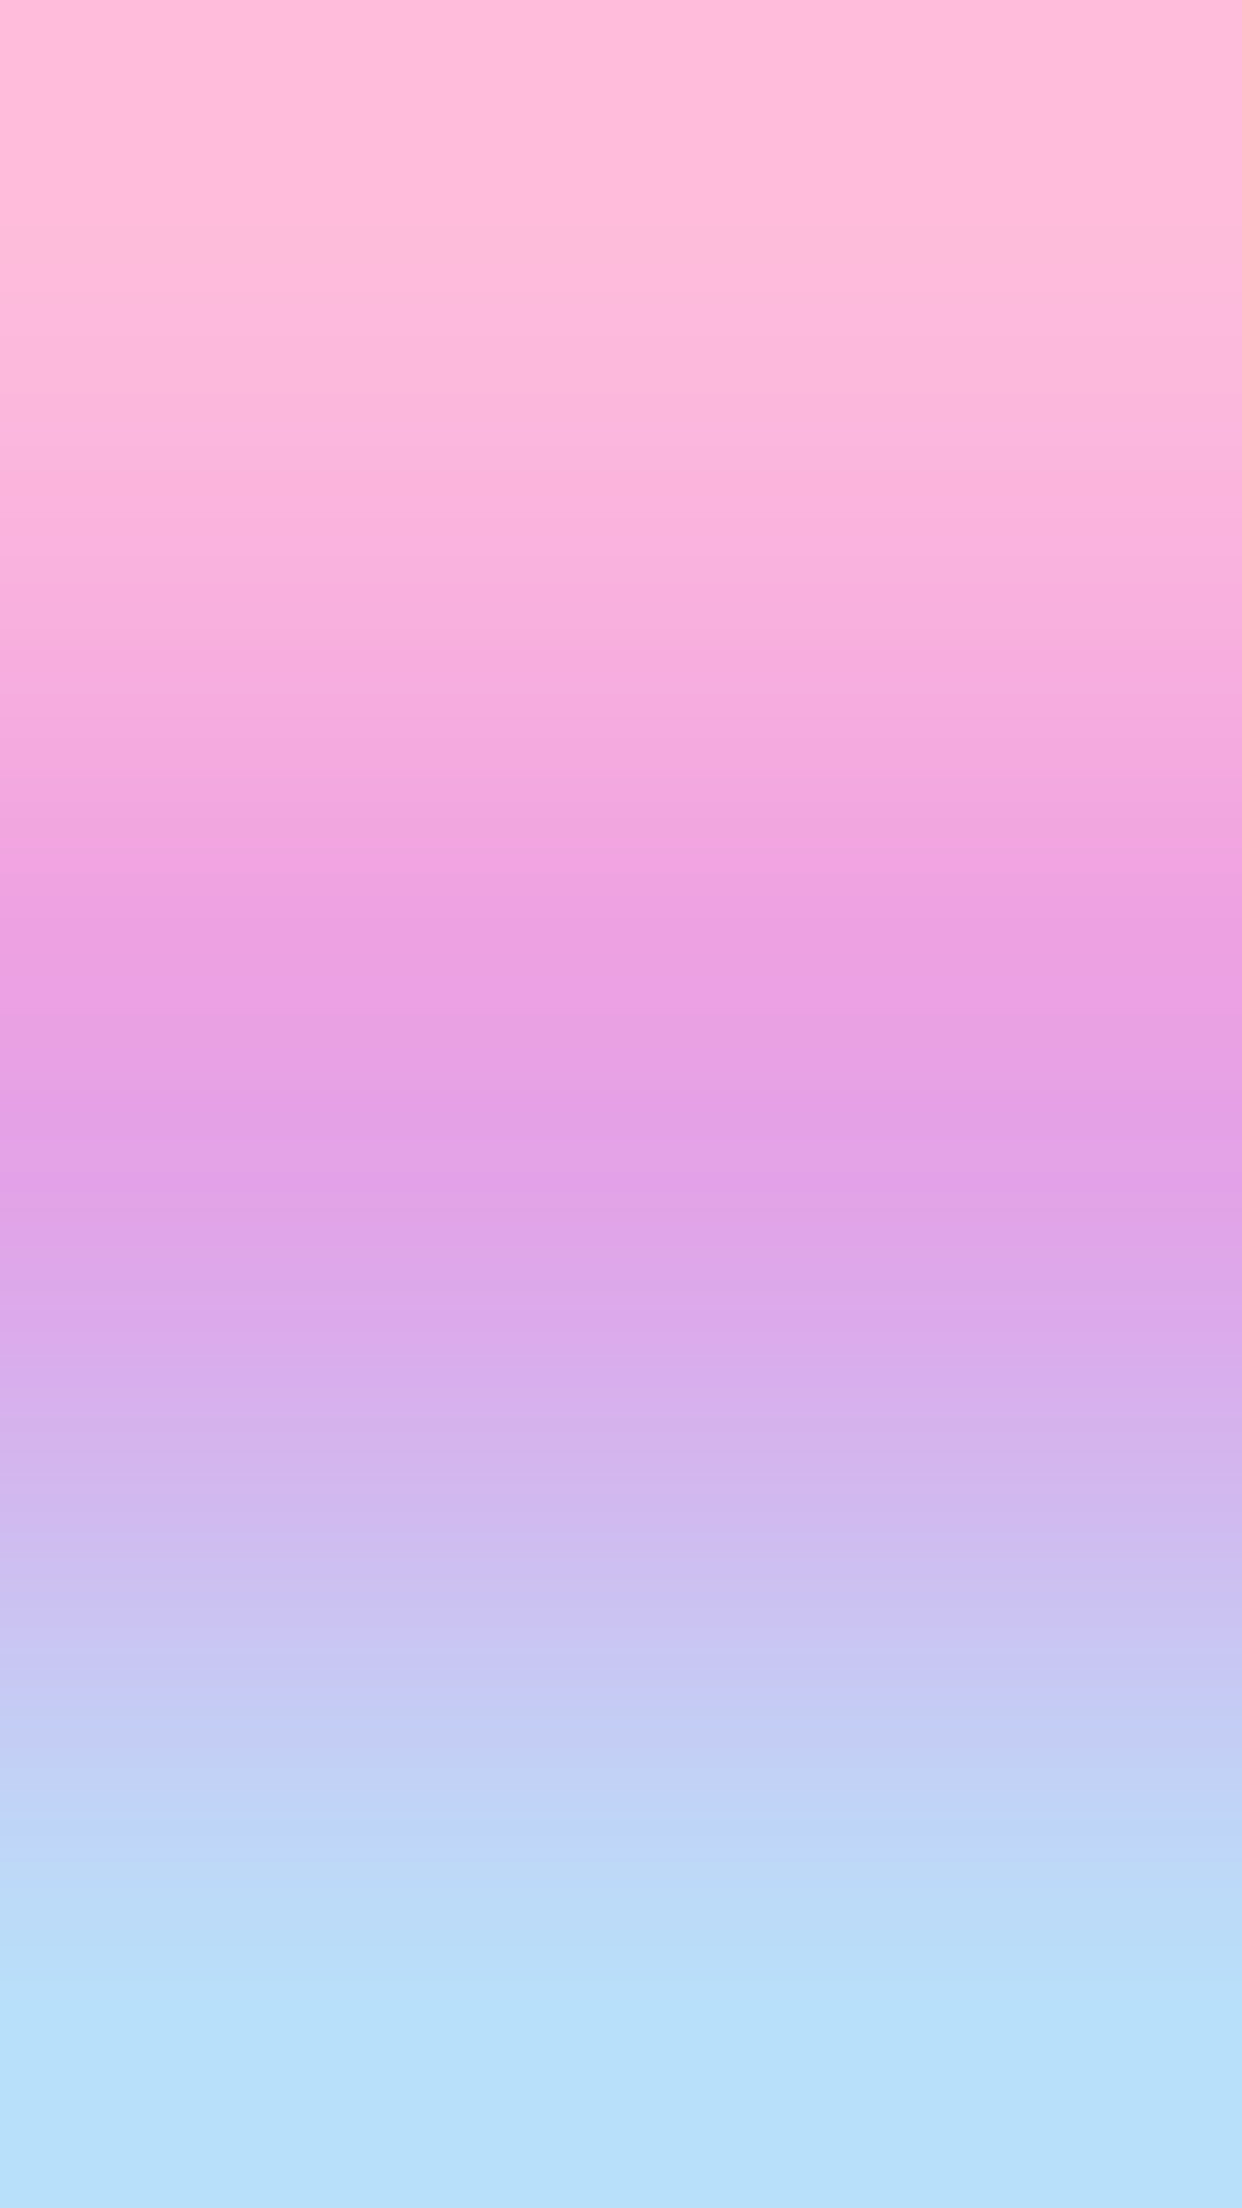 Wallpaper, background, iPhone, Android, HD, pink, purple, gradient